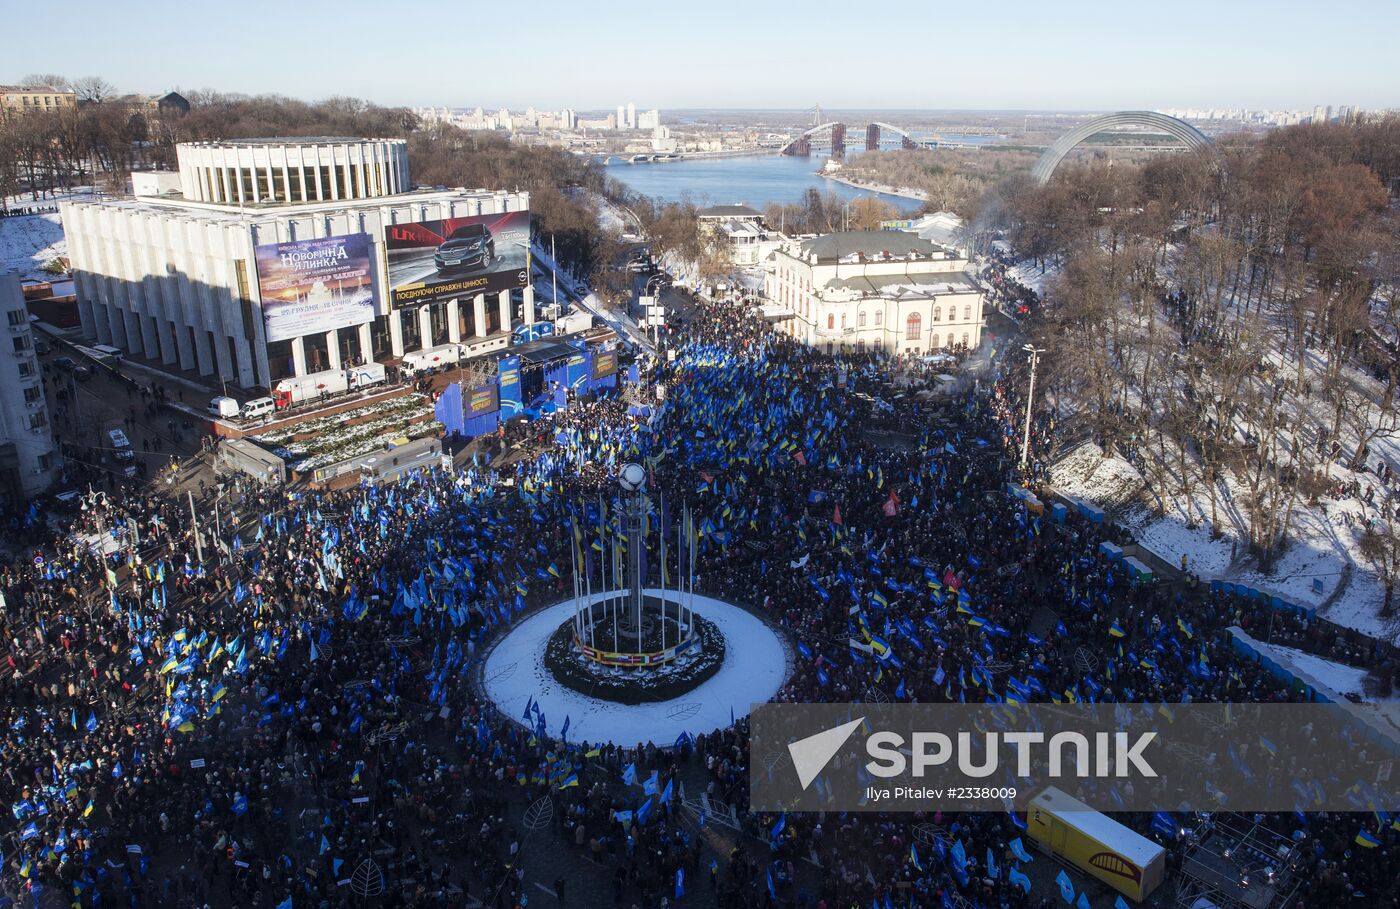 Supporters of Party of Regions rally in Kiev